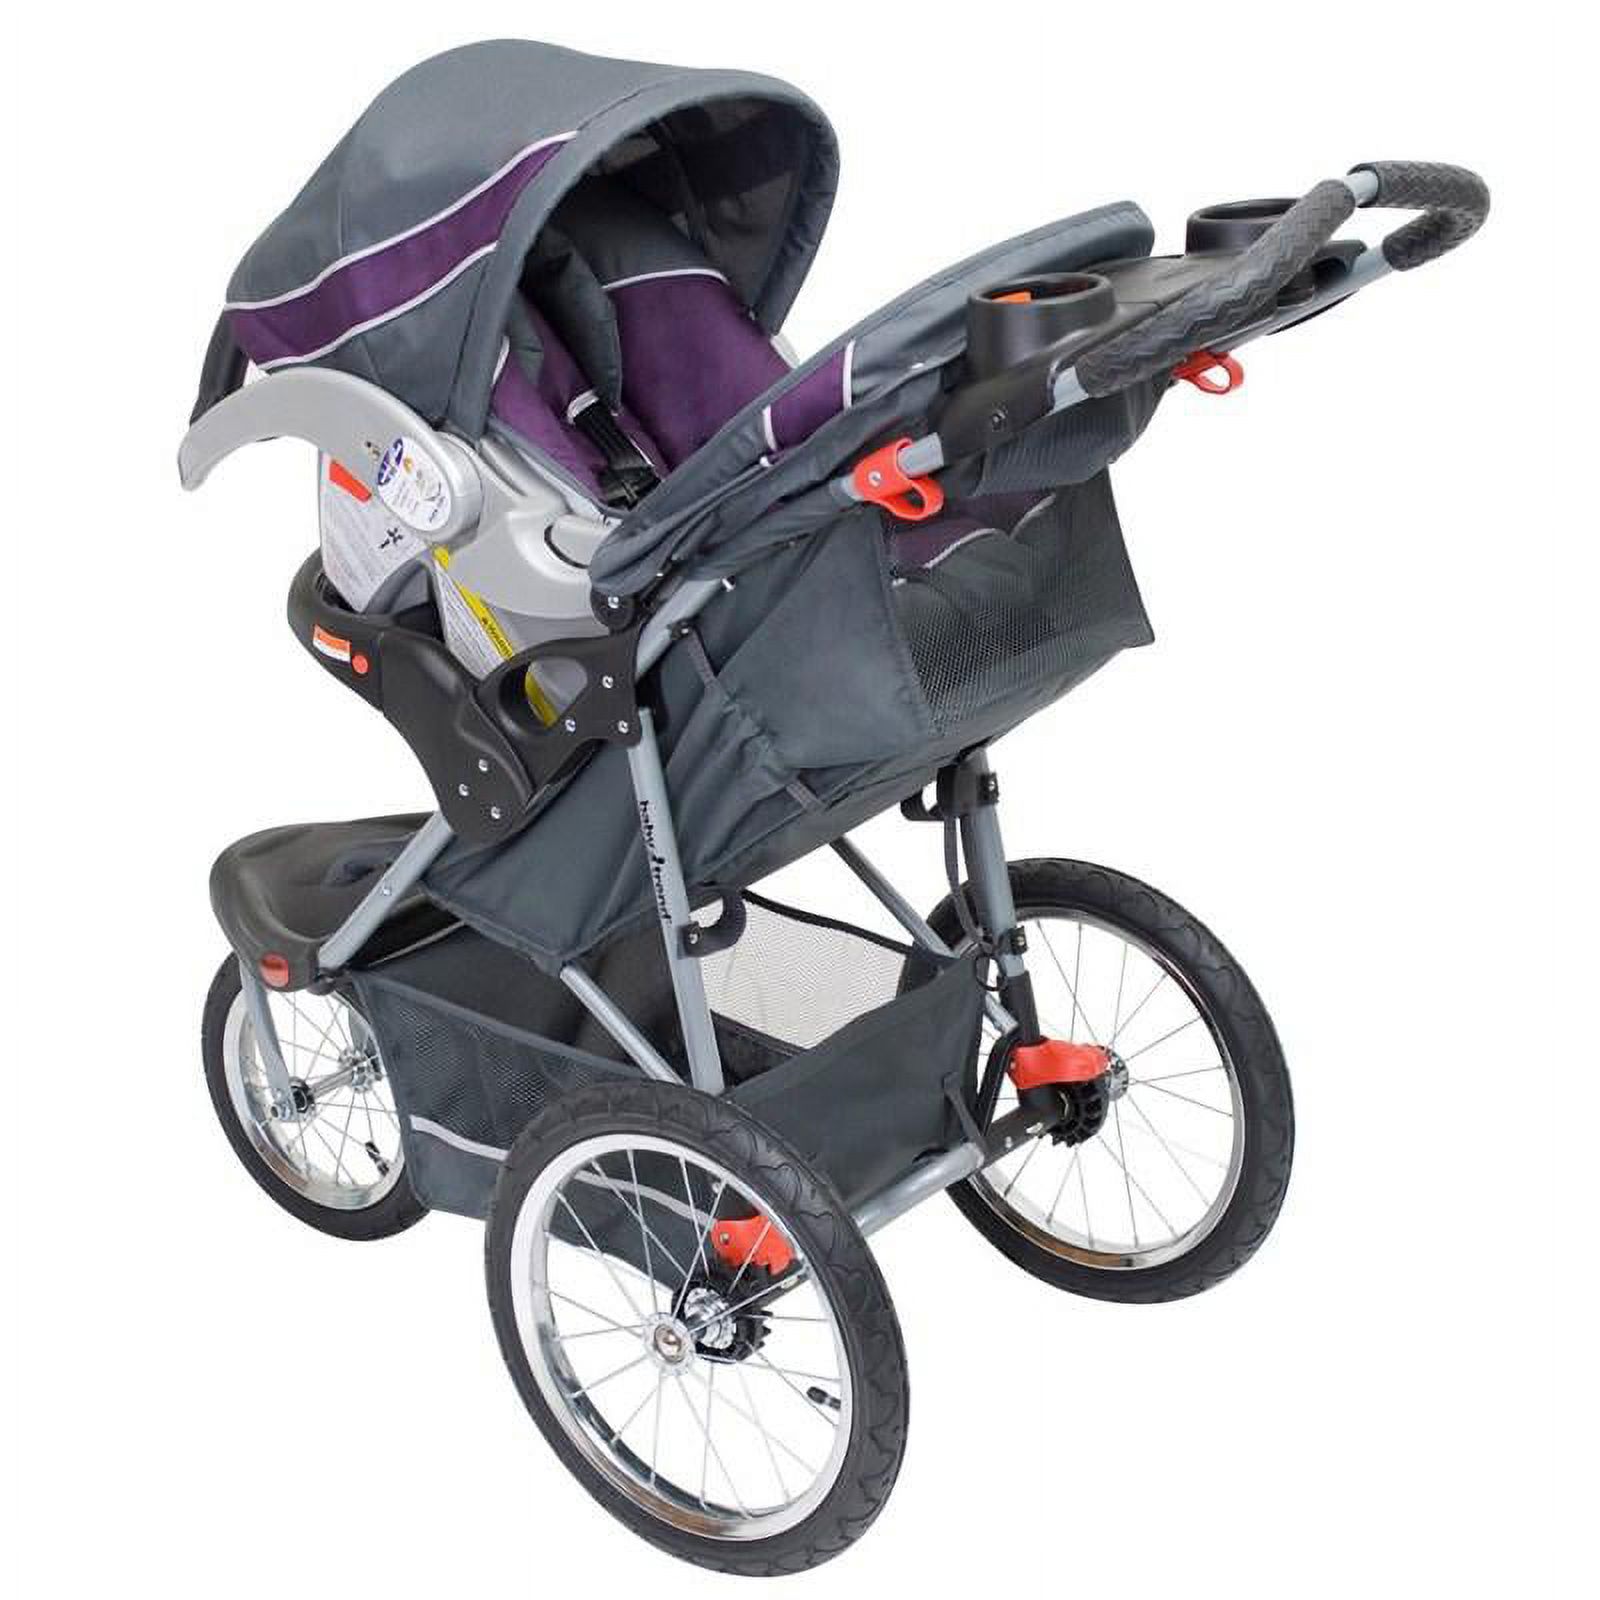 Baby Trend Expedition Travel System Stroller, Elixer - image 3 of 9